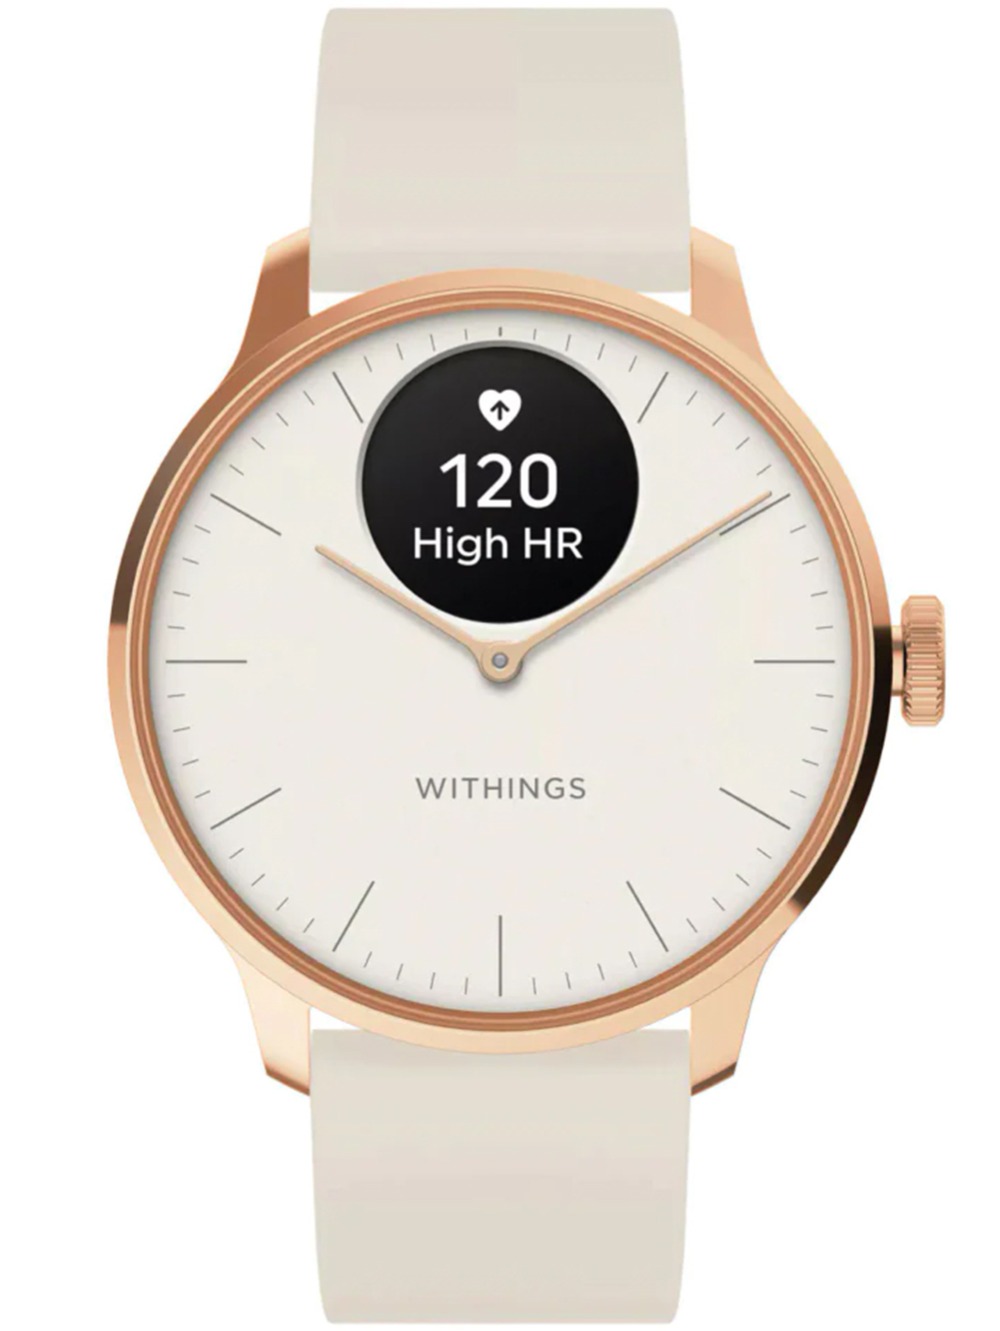 Withings HWA11-model 1-All-Int ScanWatch Light Sand 37 mm 5ATM